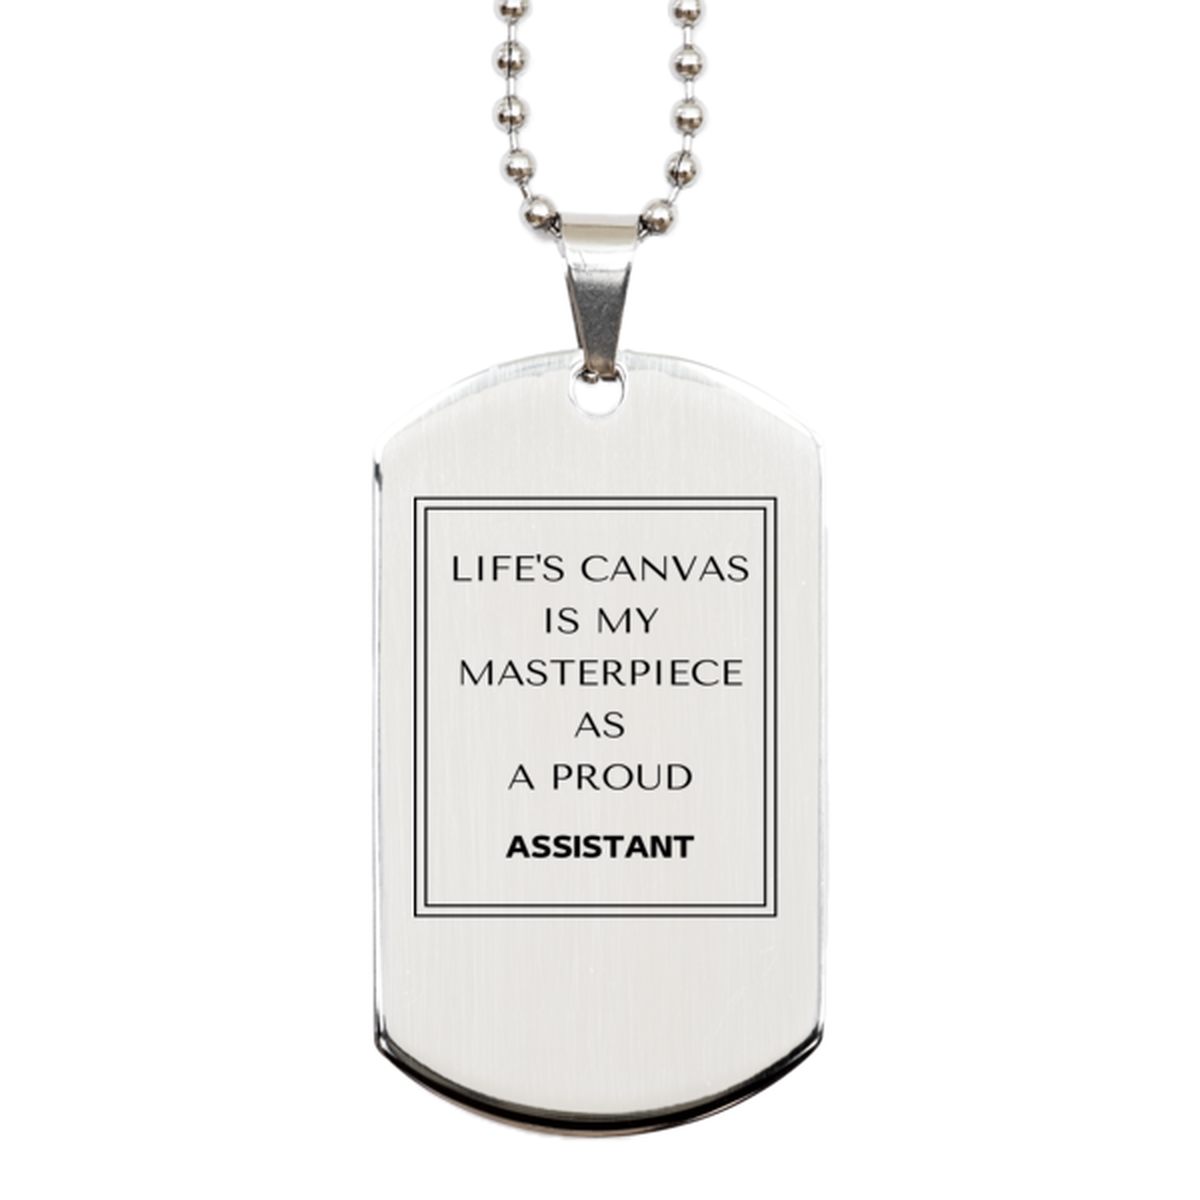 Proud Assistant Gifts, Life's canvas is my masterpiece, Epic Birthday Christmas Unique Silver Dog Tag For Assistant, Coworkers, Men, Women, Friends